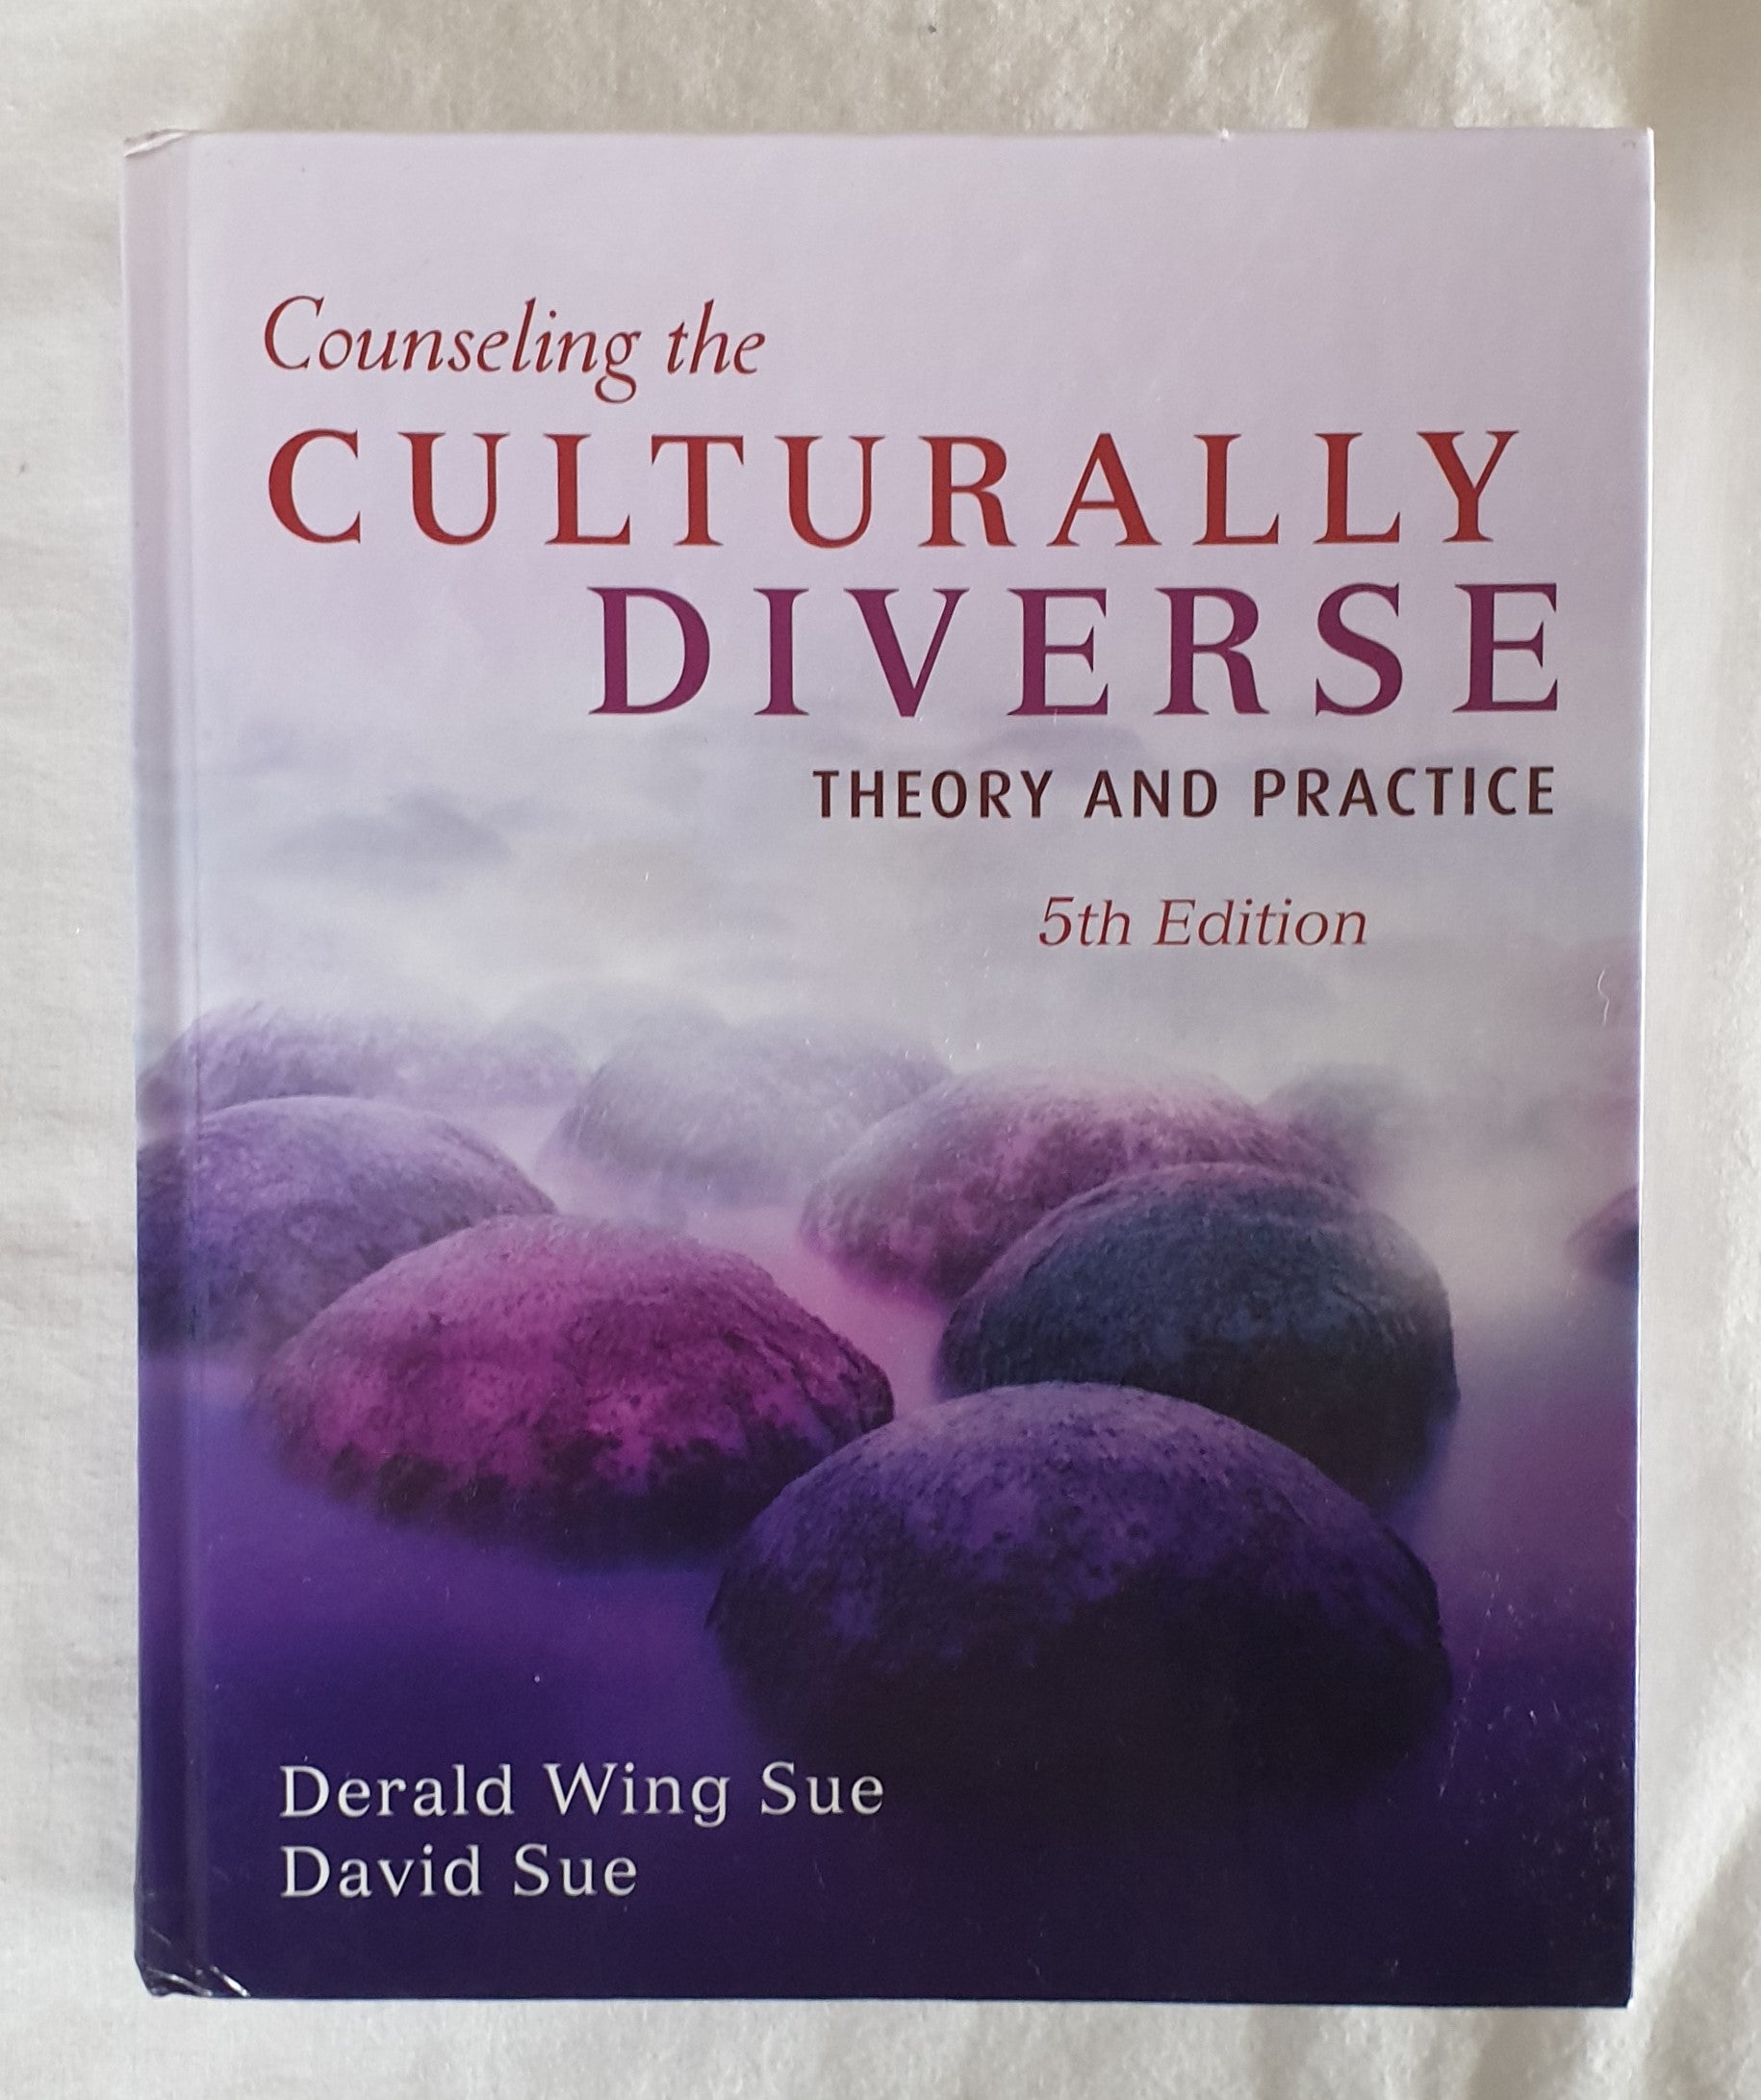 Counseling the Culturally Diverse by Derald Wing Sue and David Sue